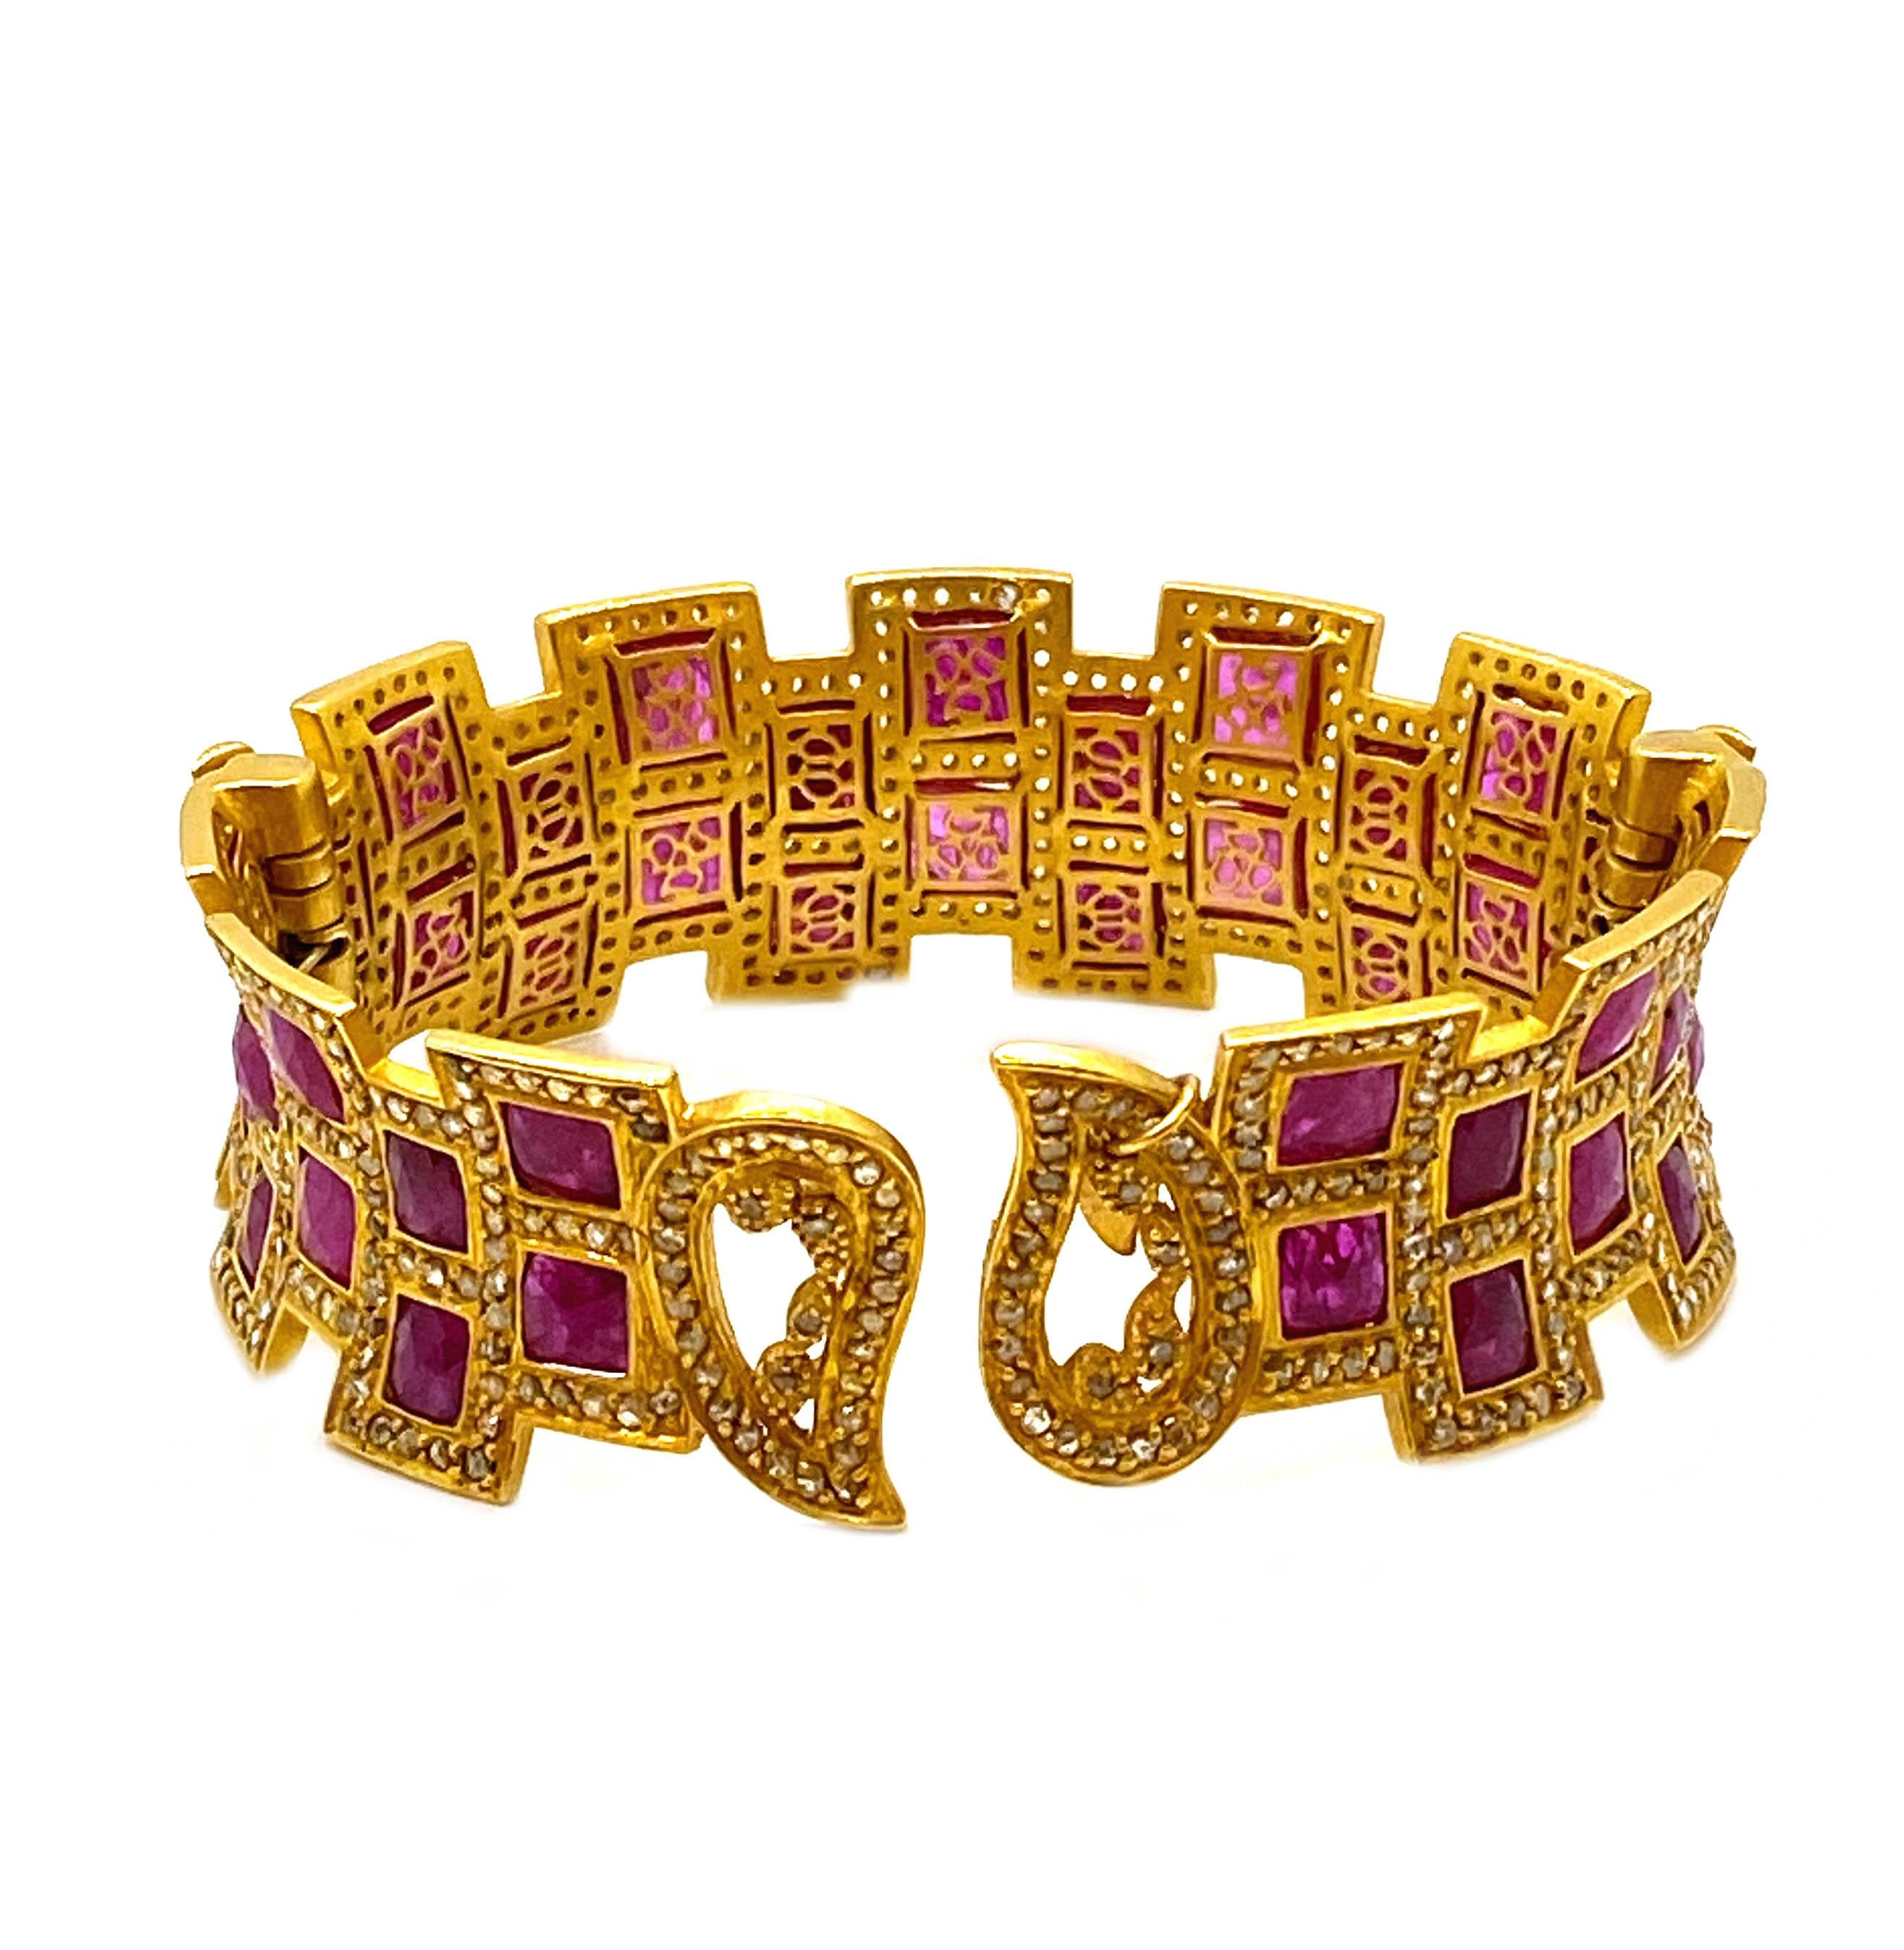 Designed to be a one of a kind piece by Coomi. The Cuff Bracelet from the Luminosity collection; which represents and consists of bold design and reflects light from within. Each uniquely natural rose cut diamond and diamond slice is chosen by